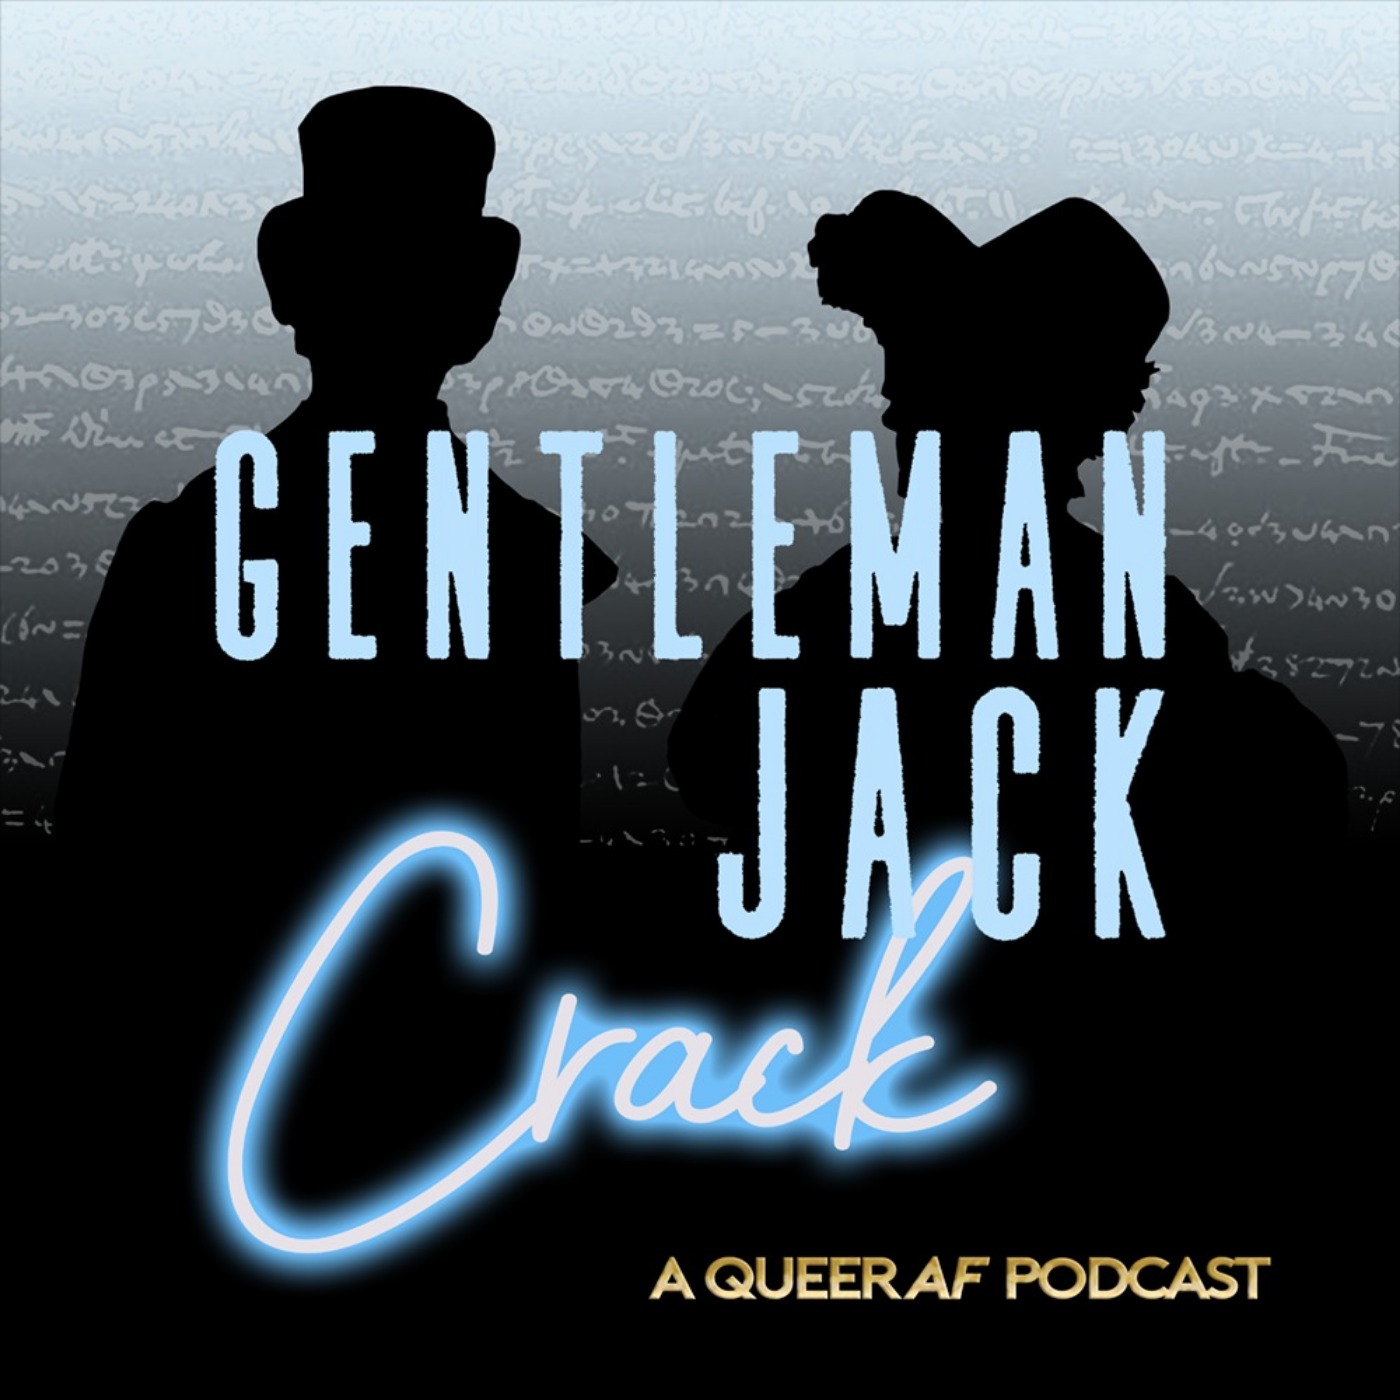 Gentleman Jack Crack - "Let's Have Another Look at Your Past Perfect"